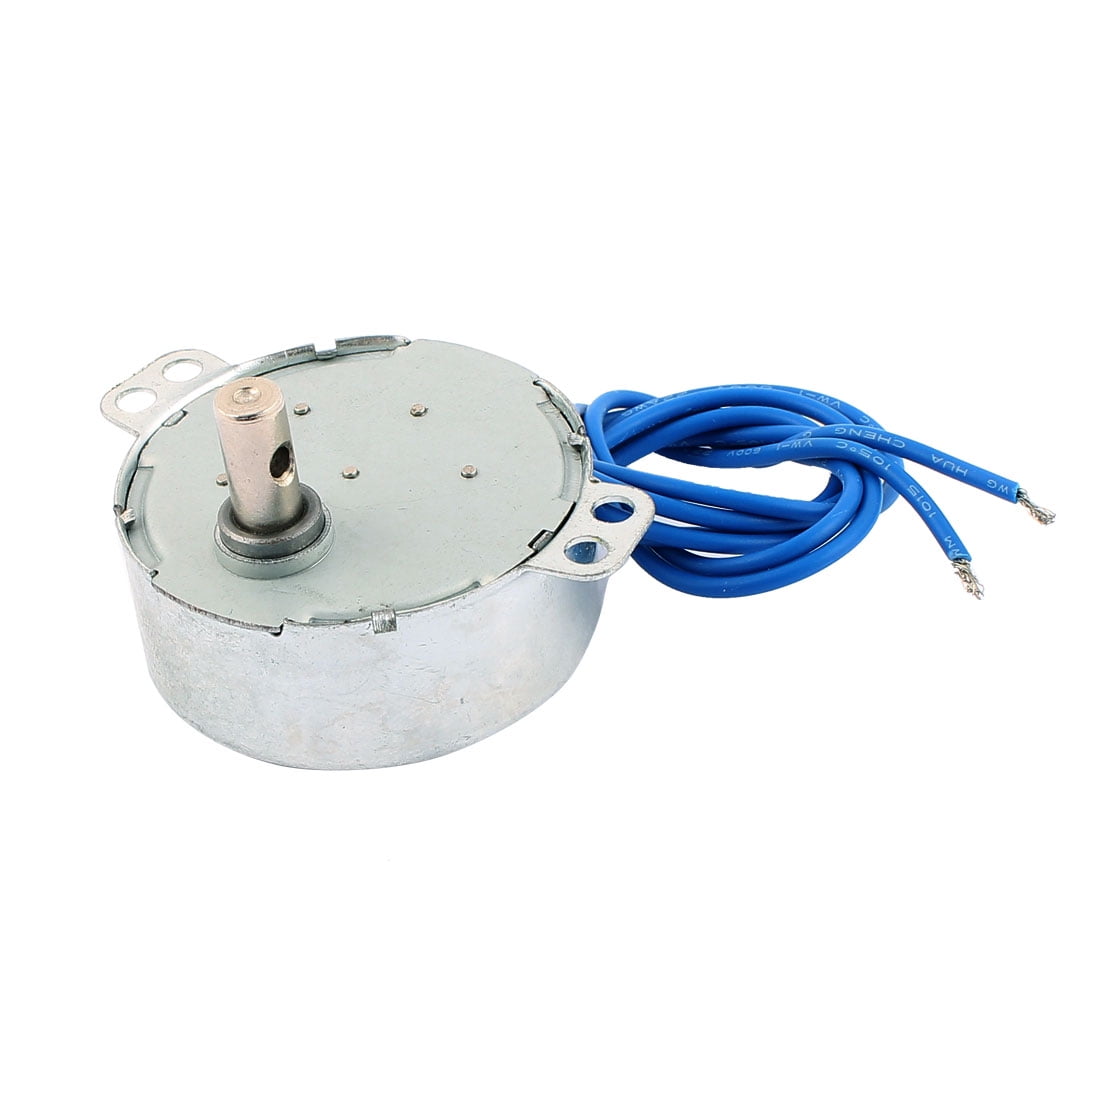 Details about   Non-directional CW/CCW Synchronous Motor 5-6rpm AC 110V for Fan Silver 